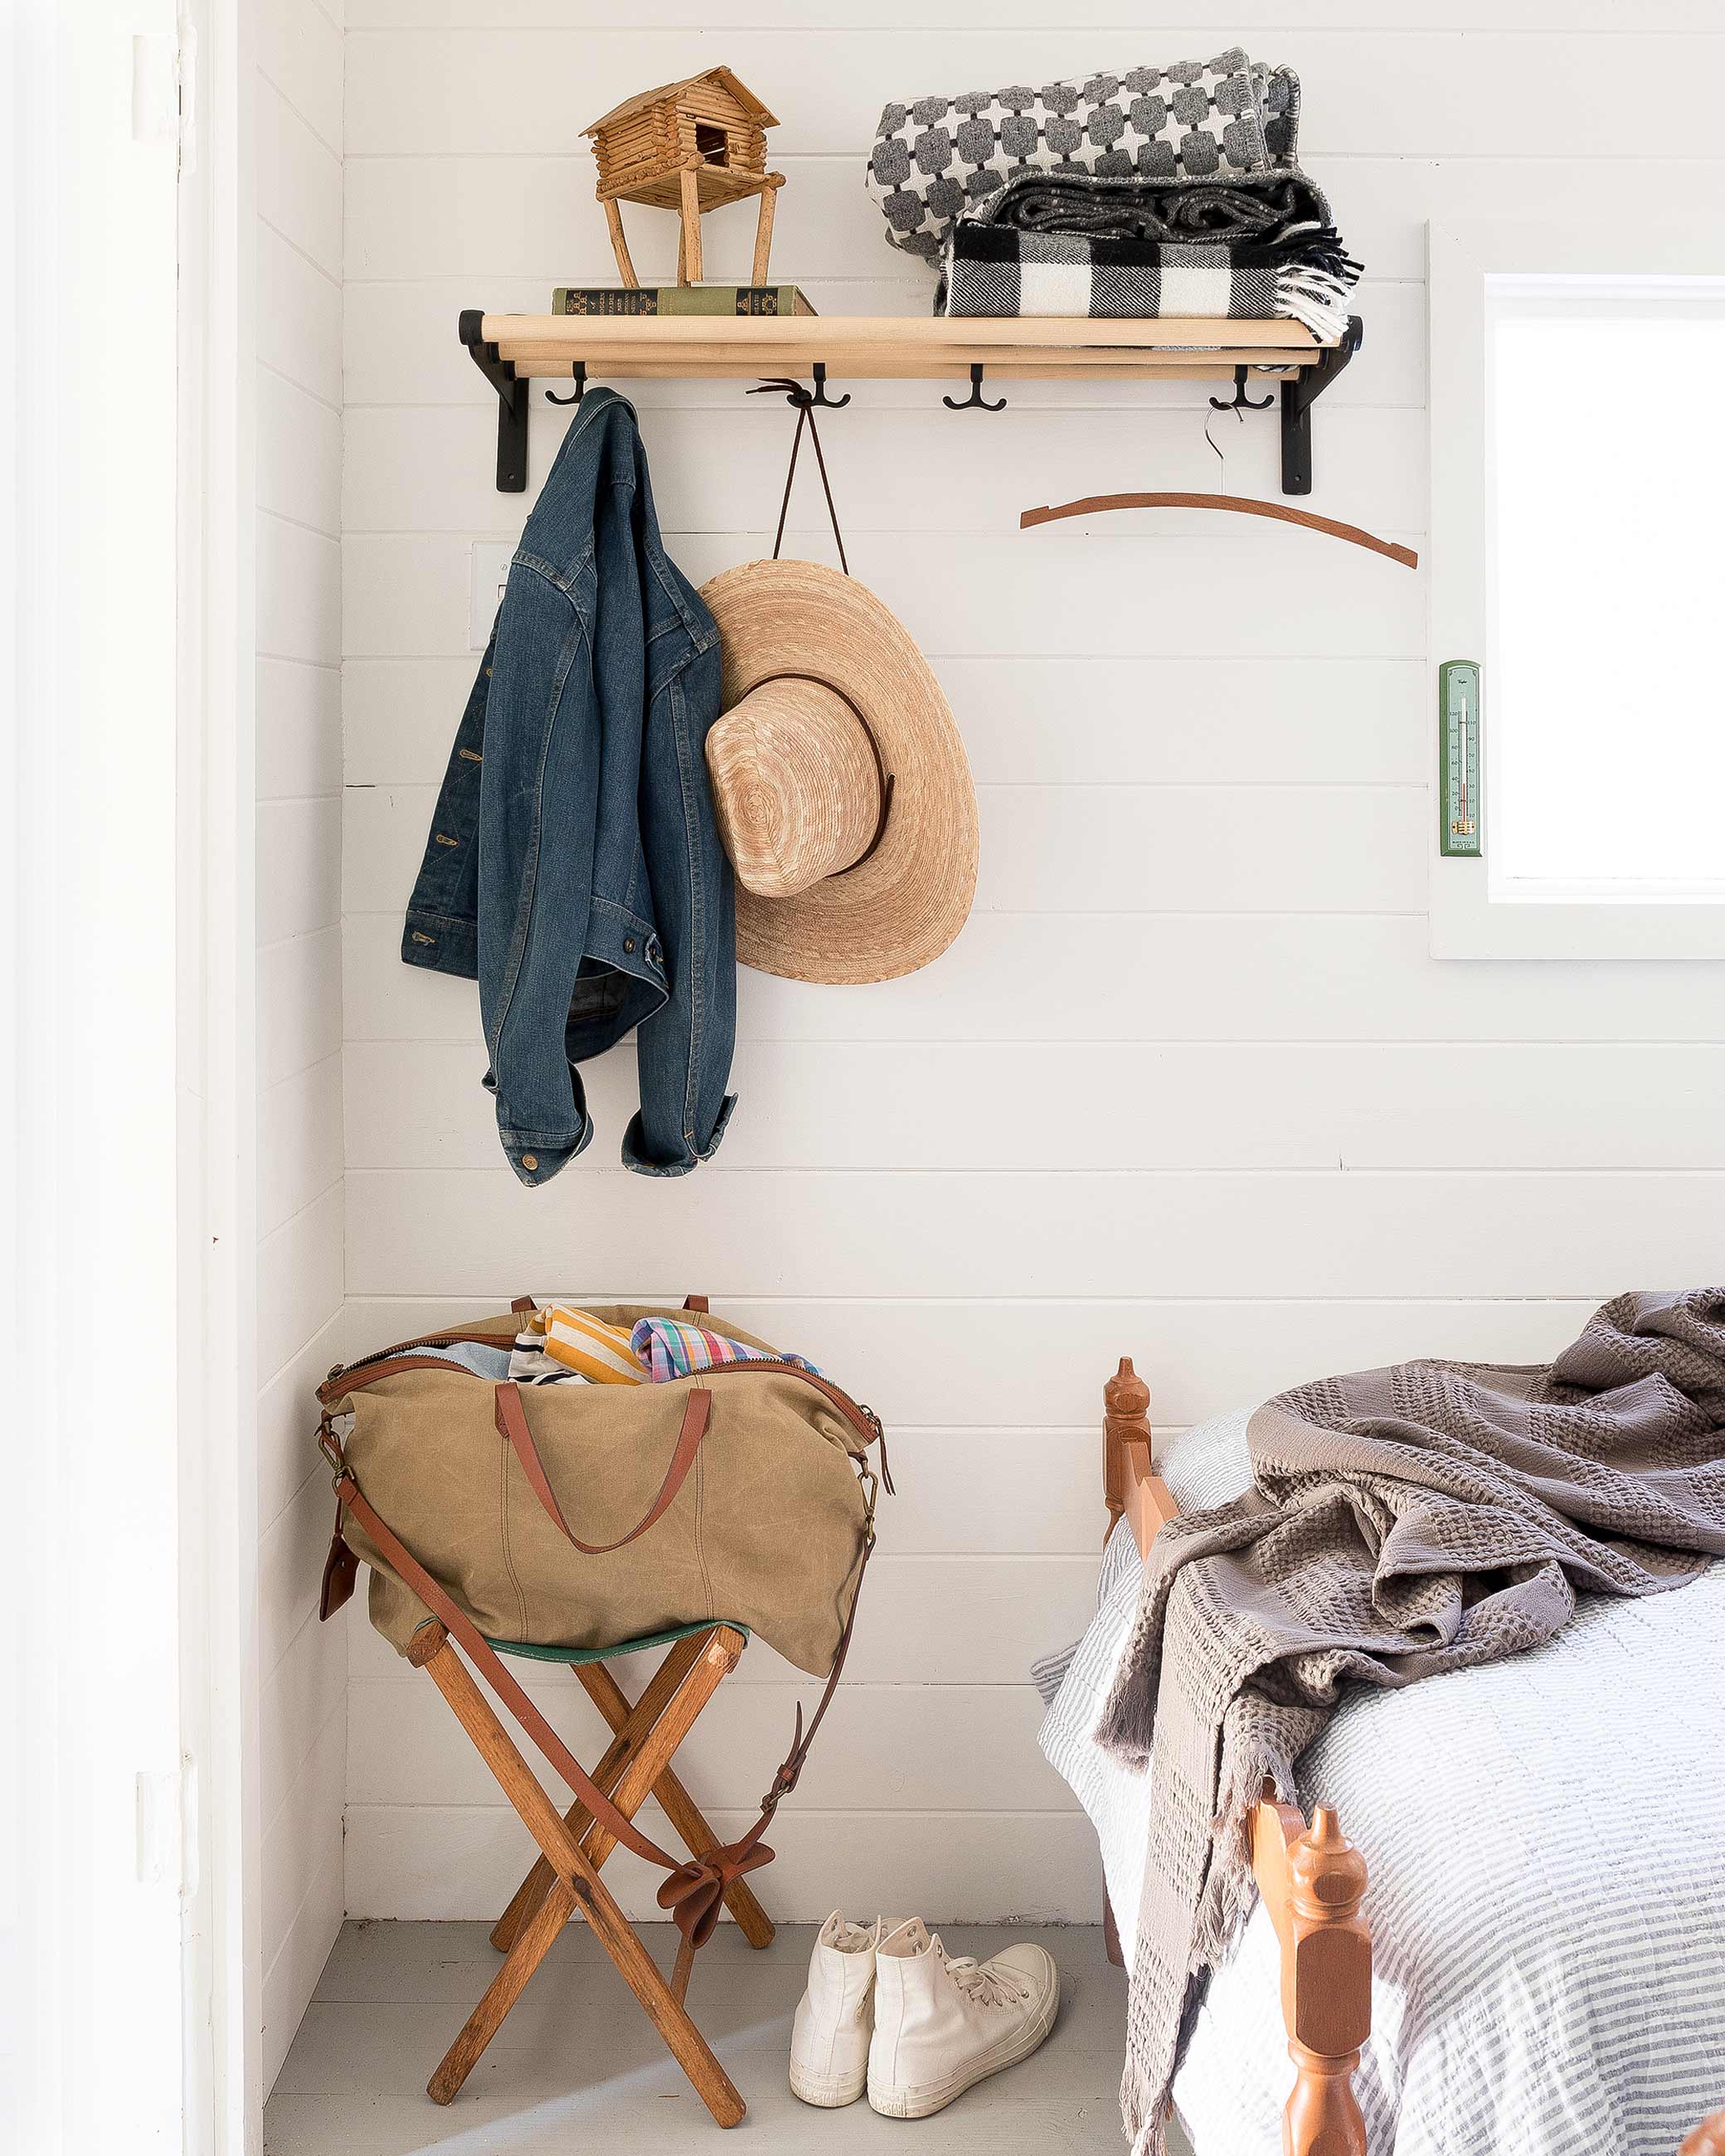 Shelf in bedroom to holding luggage, jackets, and a hat.